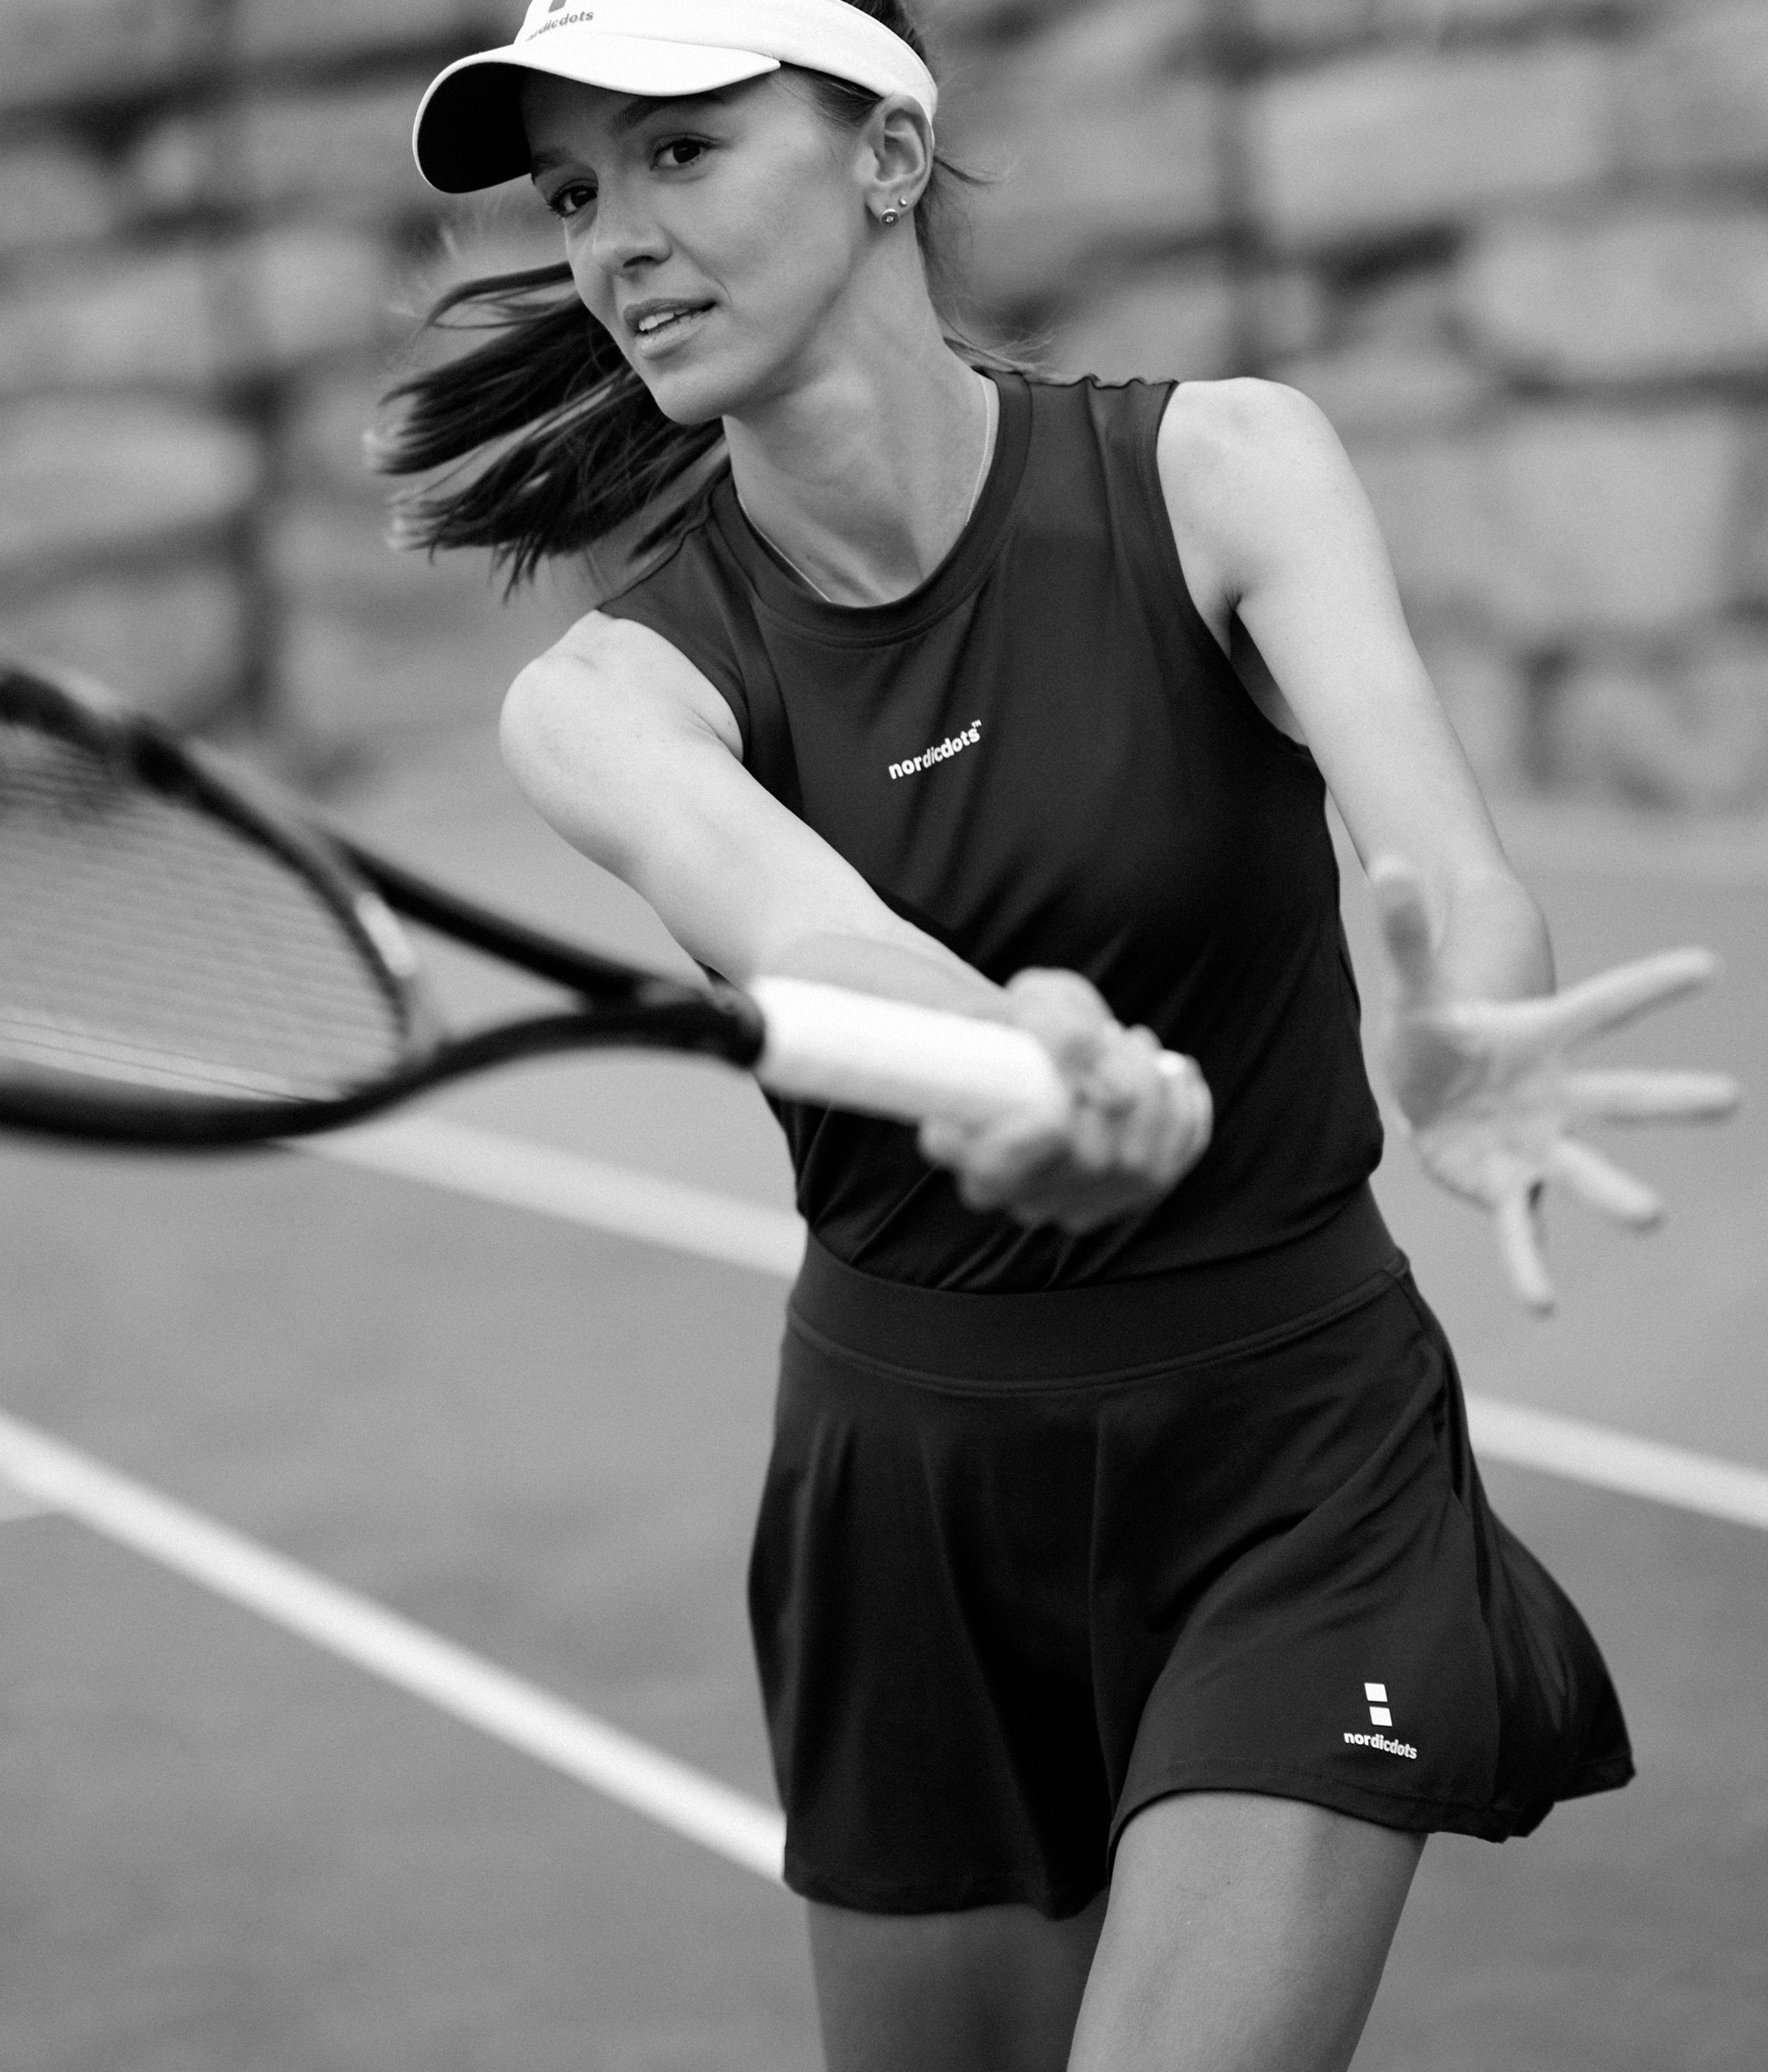 tennis player nordicdots clothing outfit apparel